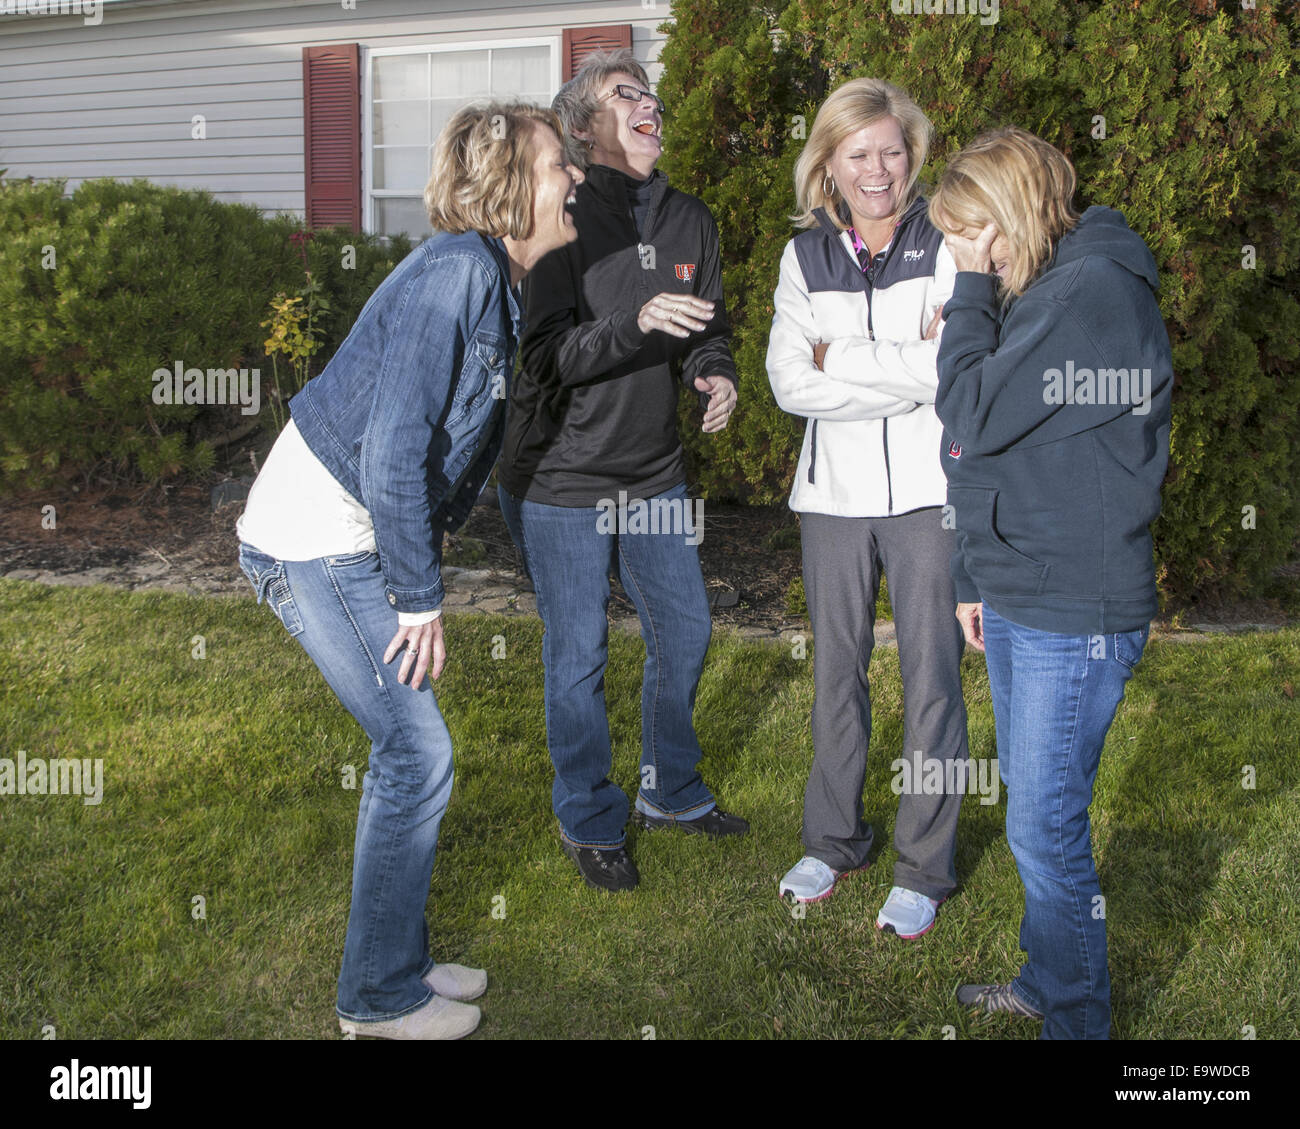 4 mature women standing outside laughing. Stock Photo